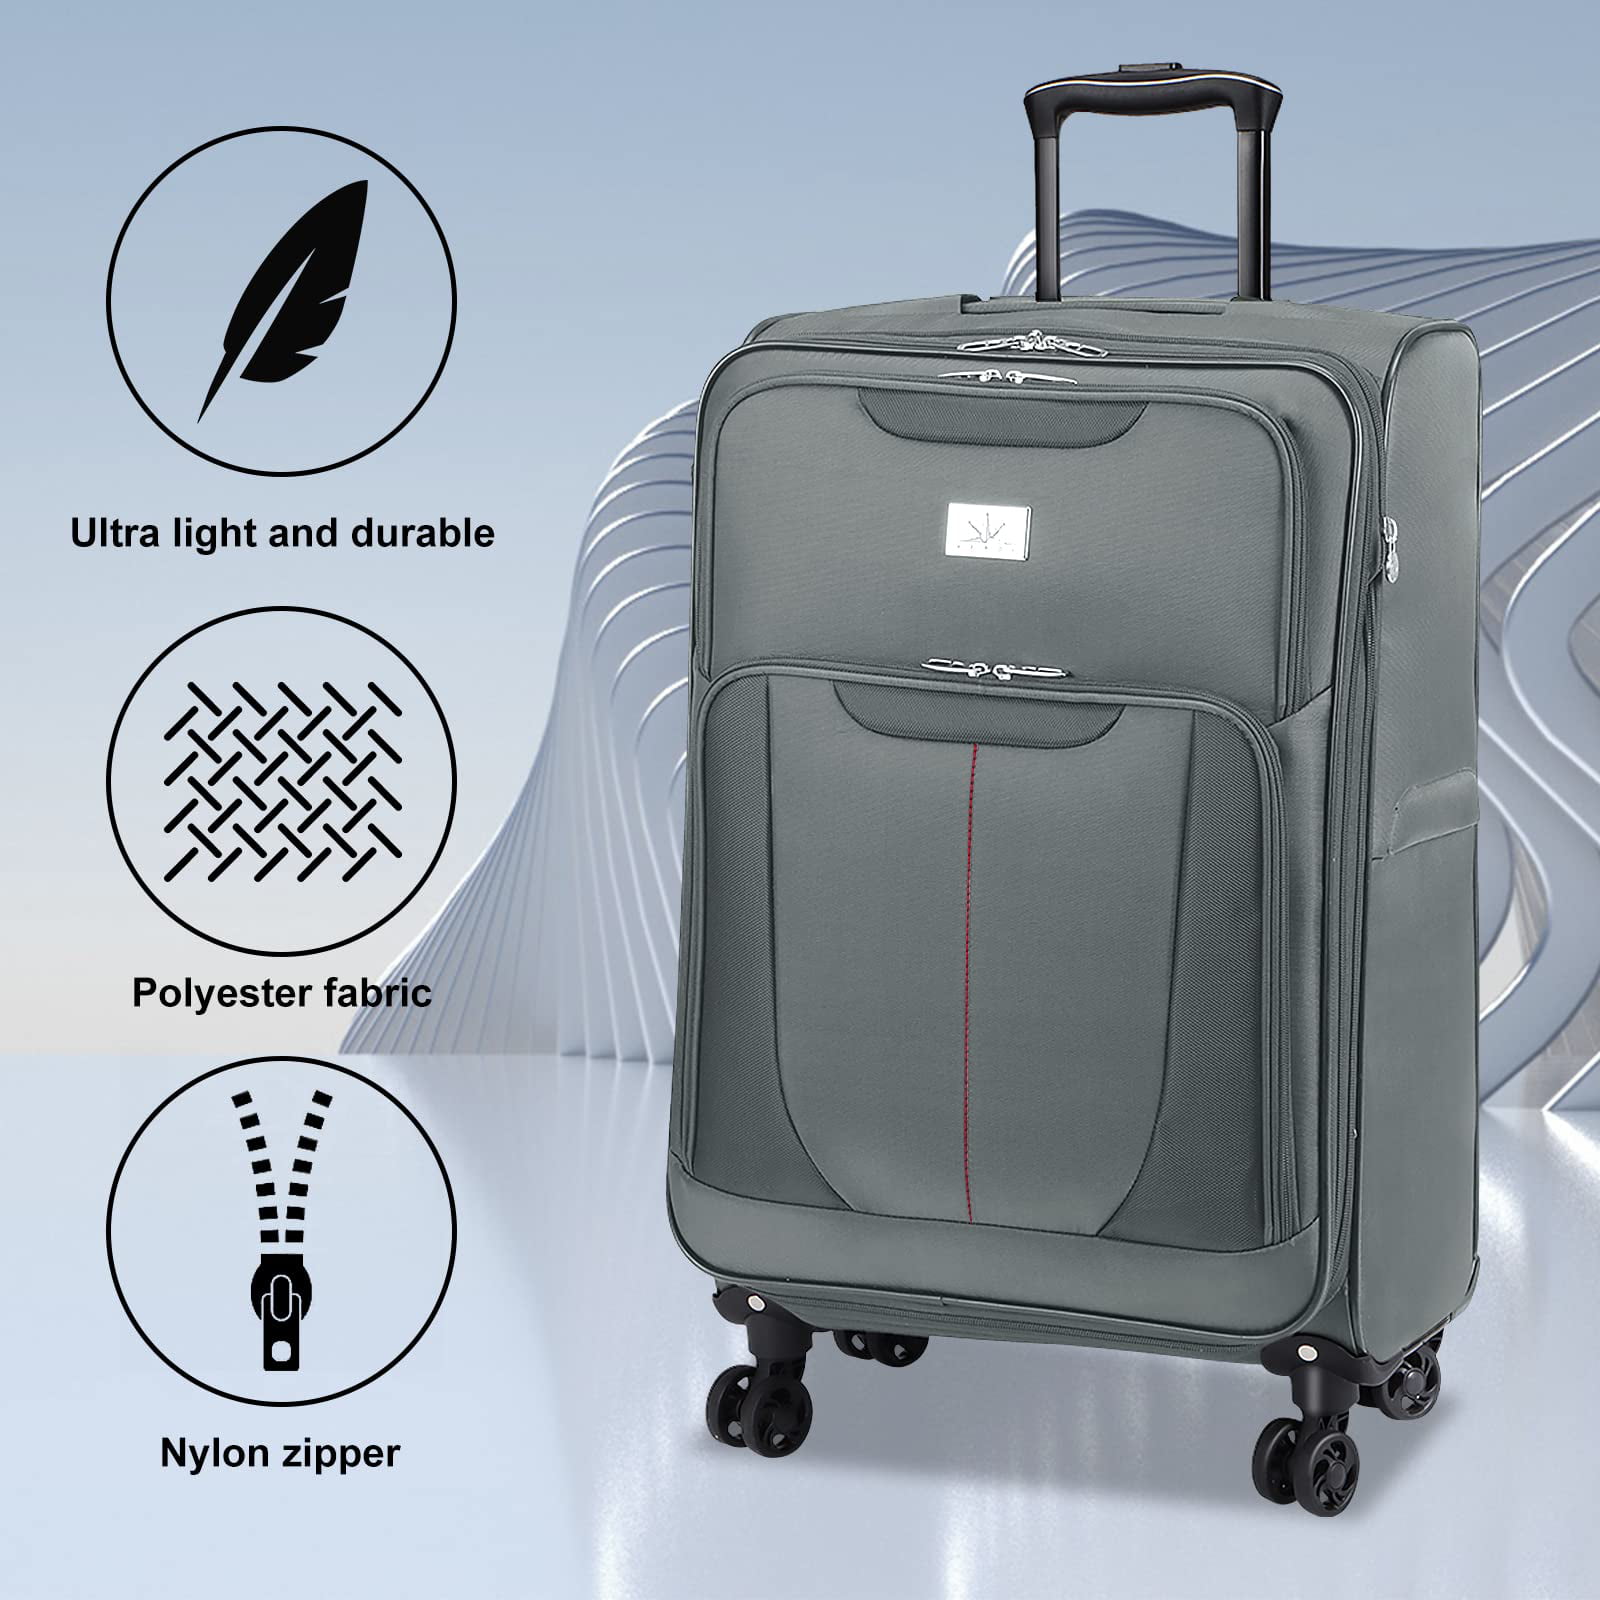 Verdi 20" Expandable Softside Luggage with Spinner Wheels